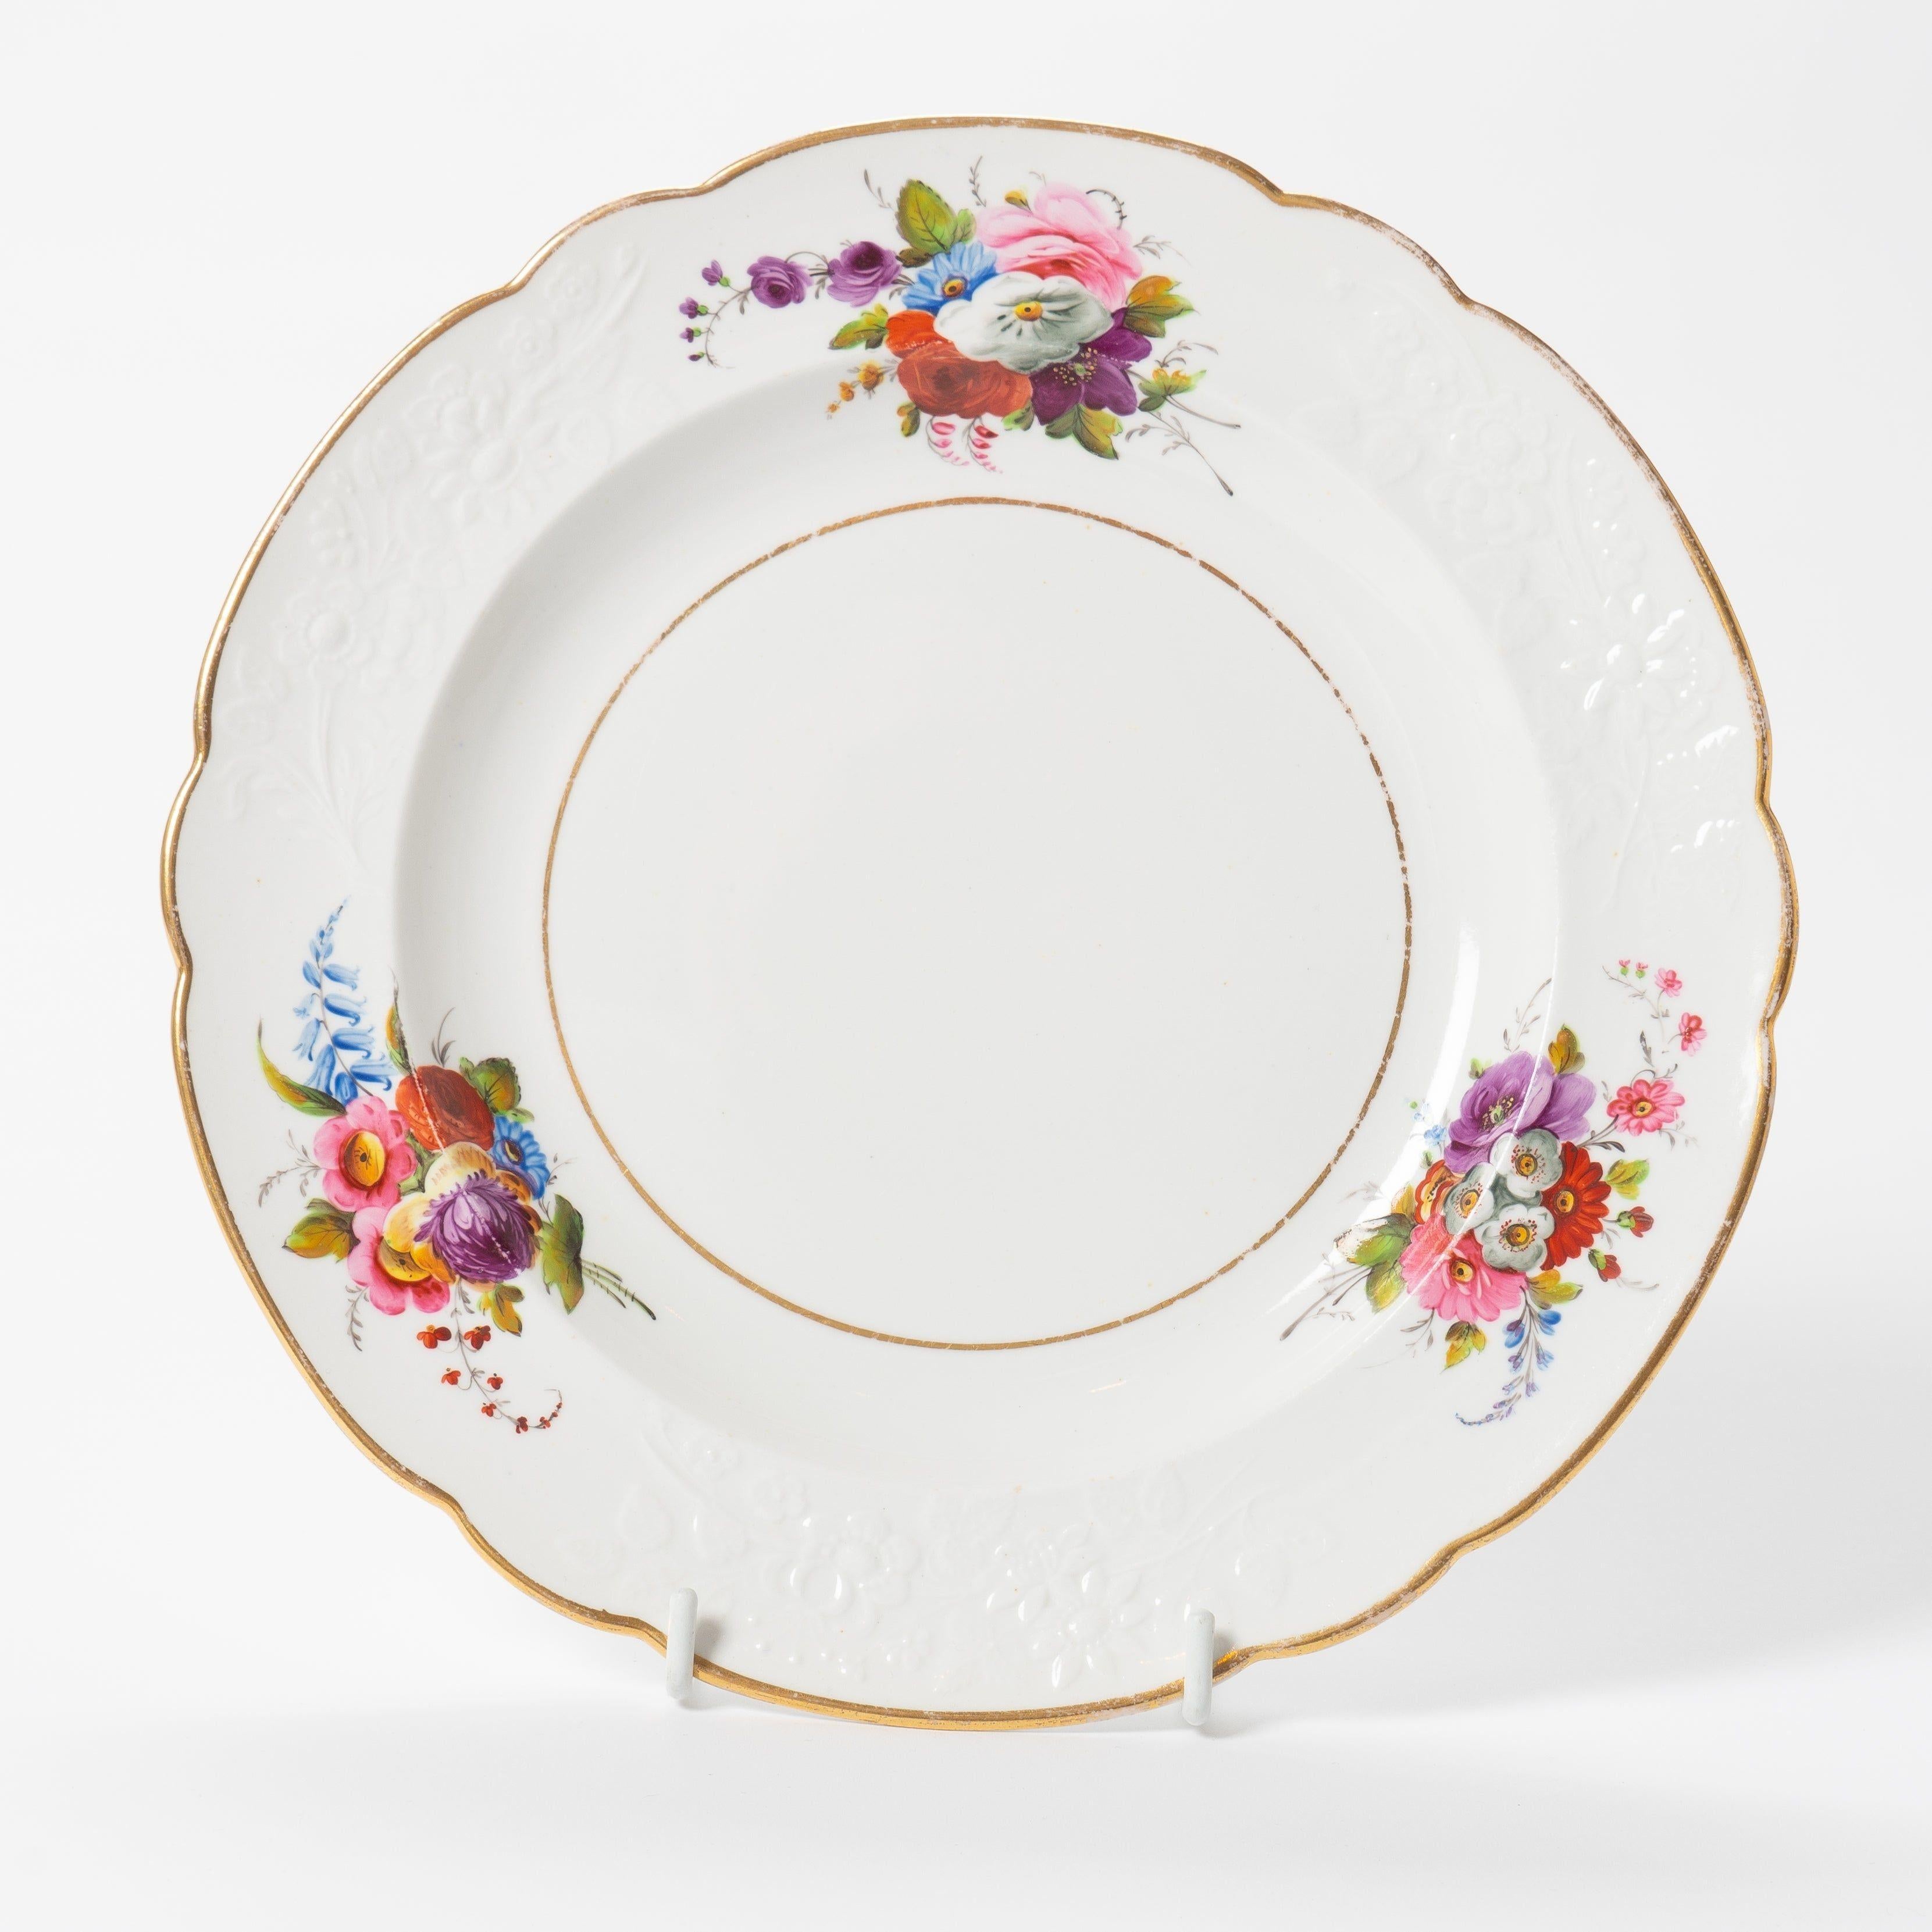 Set of twelve Spode bone china dinner plates with characteristically English hand painted mixed floral bouquets in vivid polychrome enamels. The plates have a scolloped rim and three raised molded floral elements in the border between three bouquets